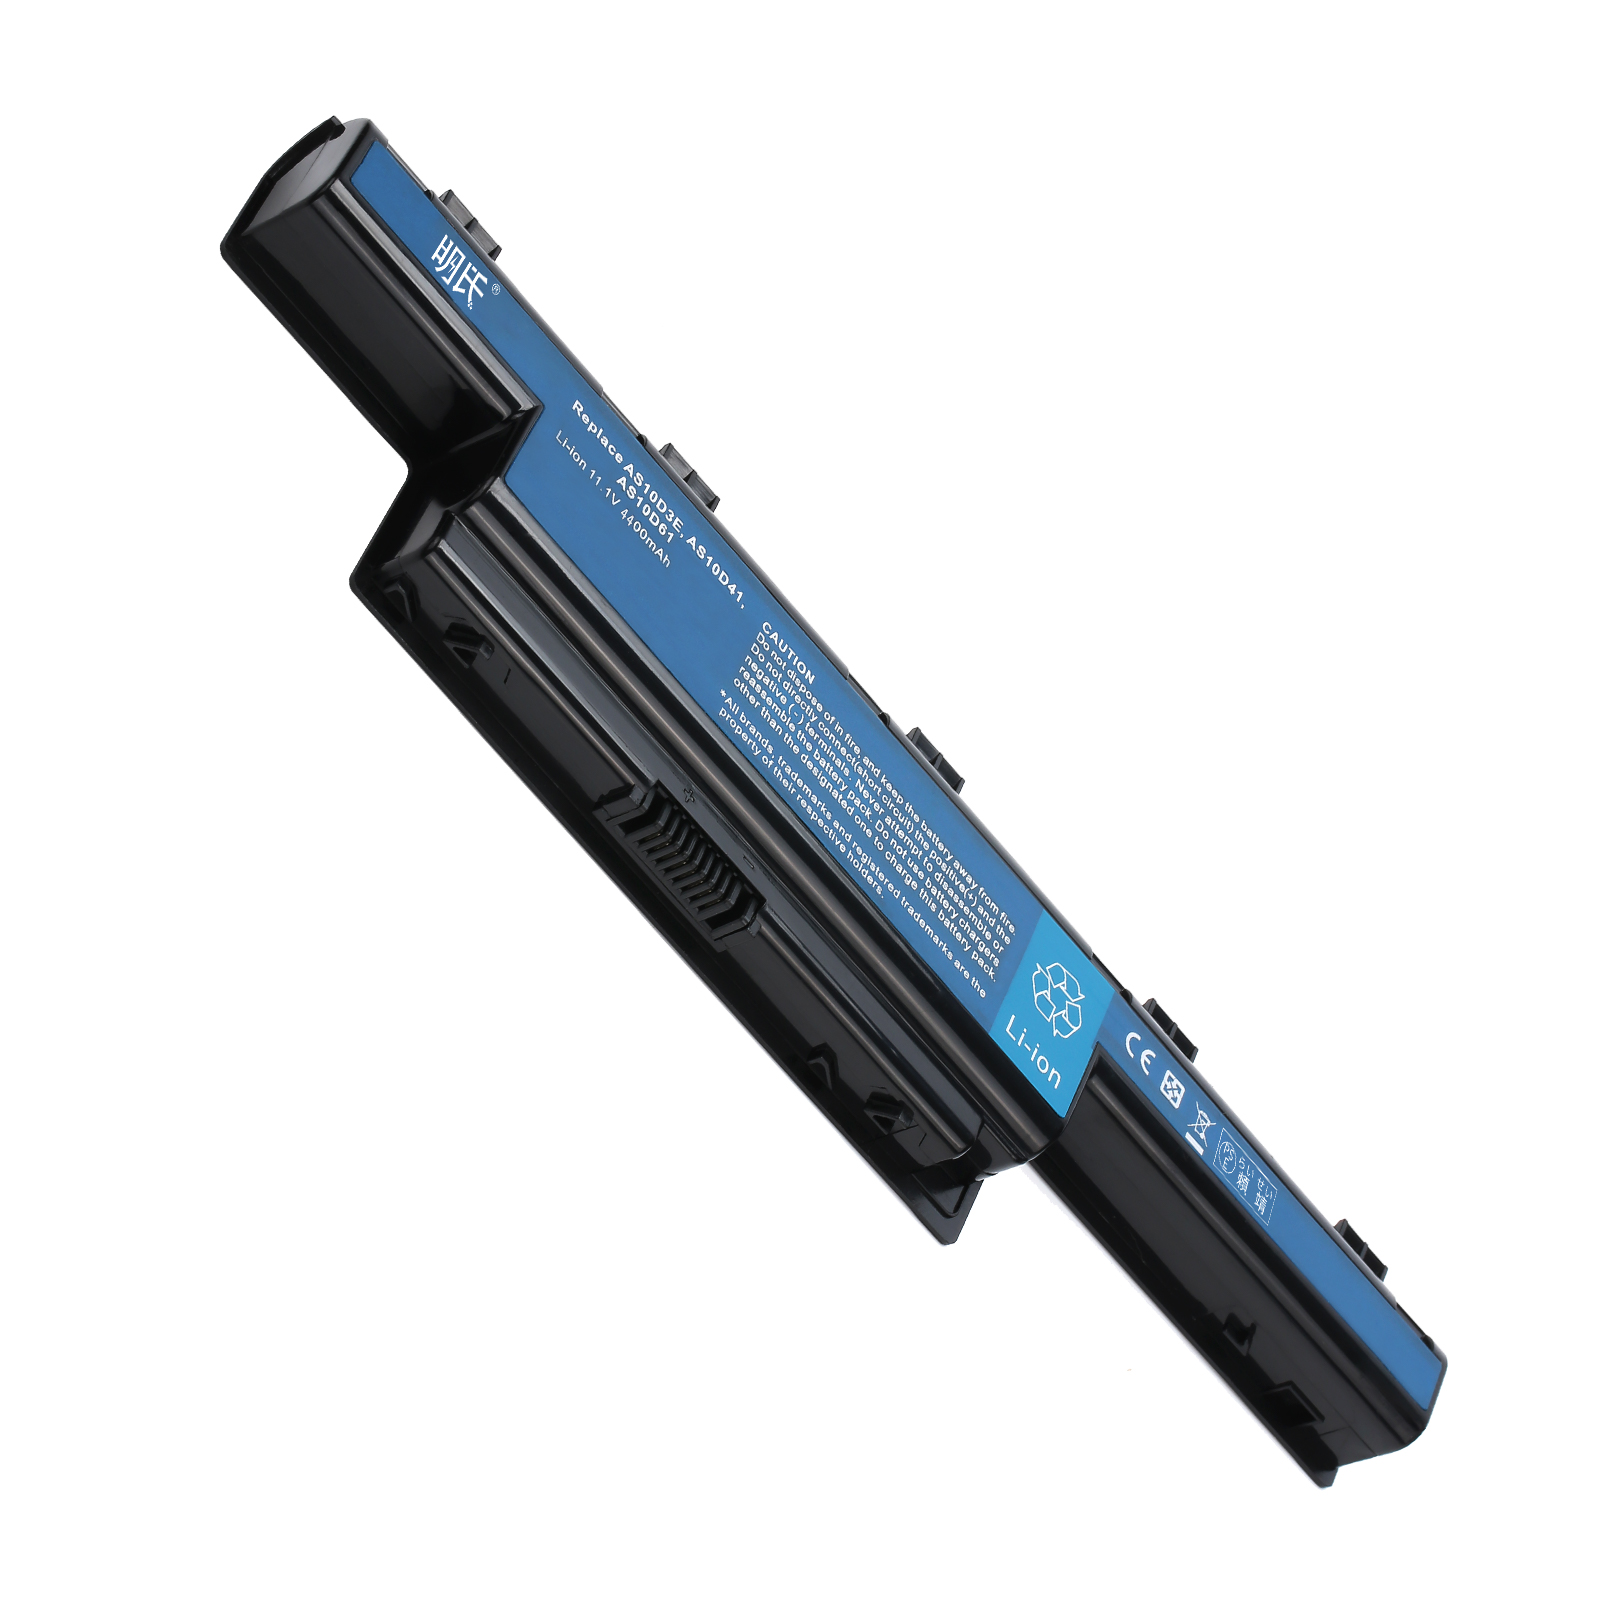 【minshi】acer ASpire 5750【4400mAh 11.1V】対応 AS10D31 AS10D3E AS10D41 AS10D51 AS10D61 AS10D71用 高性能 ノートパソコン 互換 バッテリー